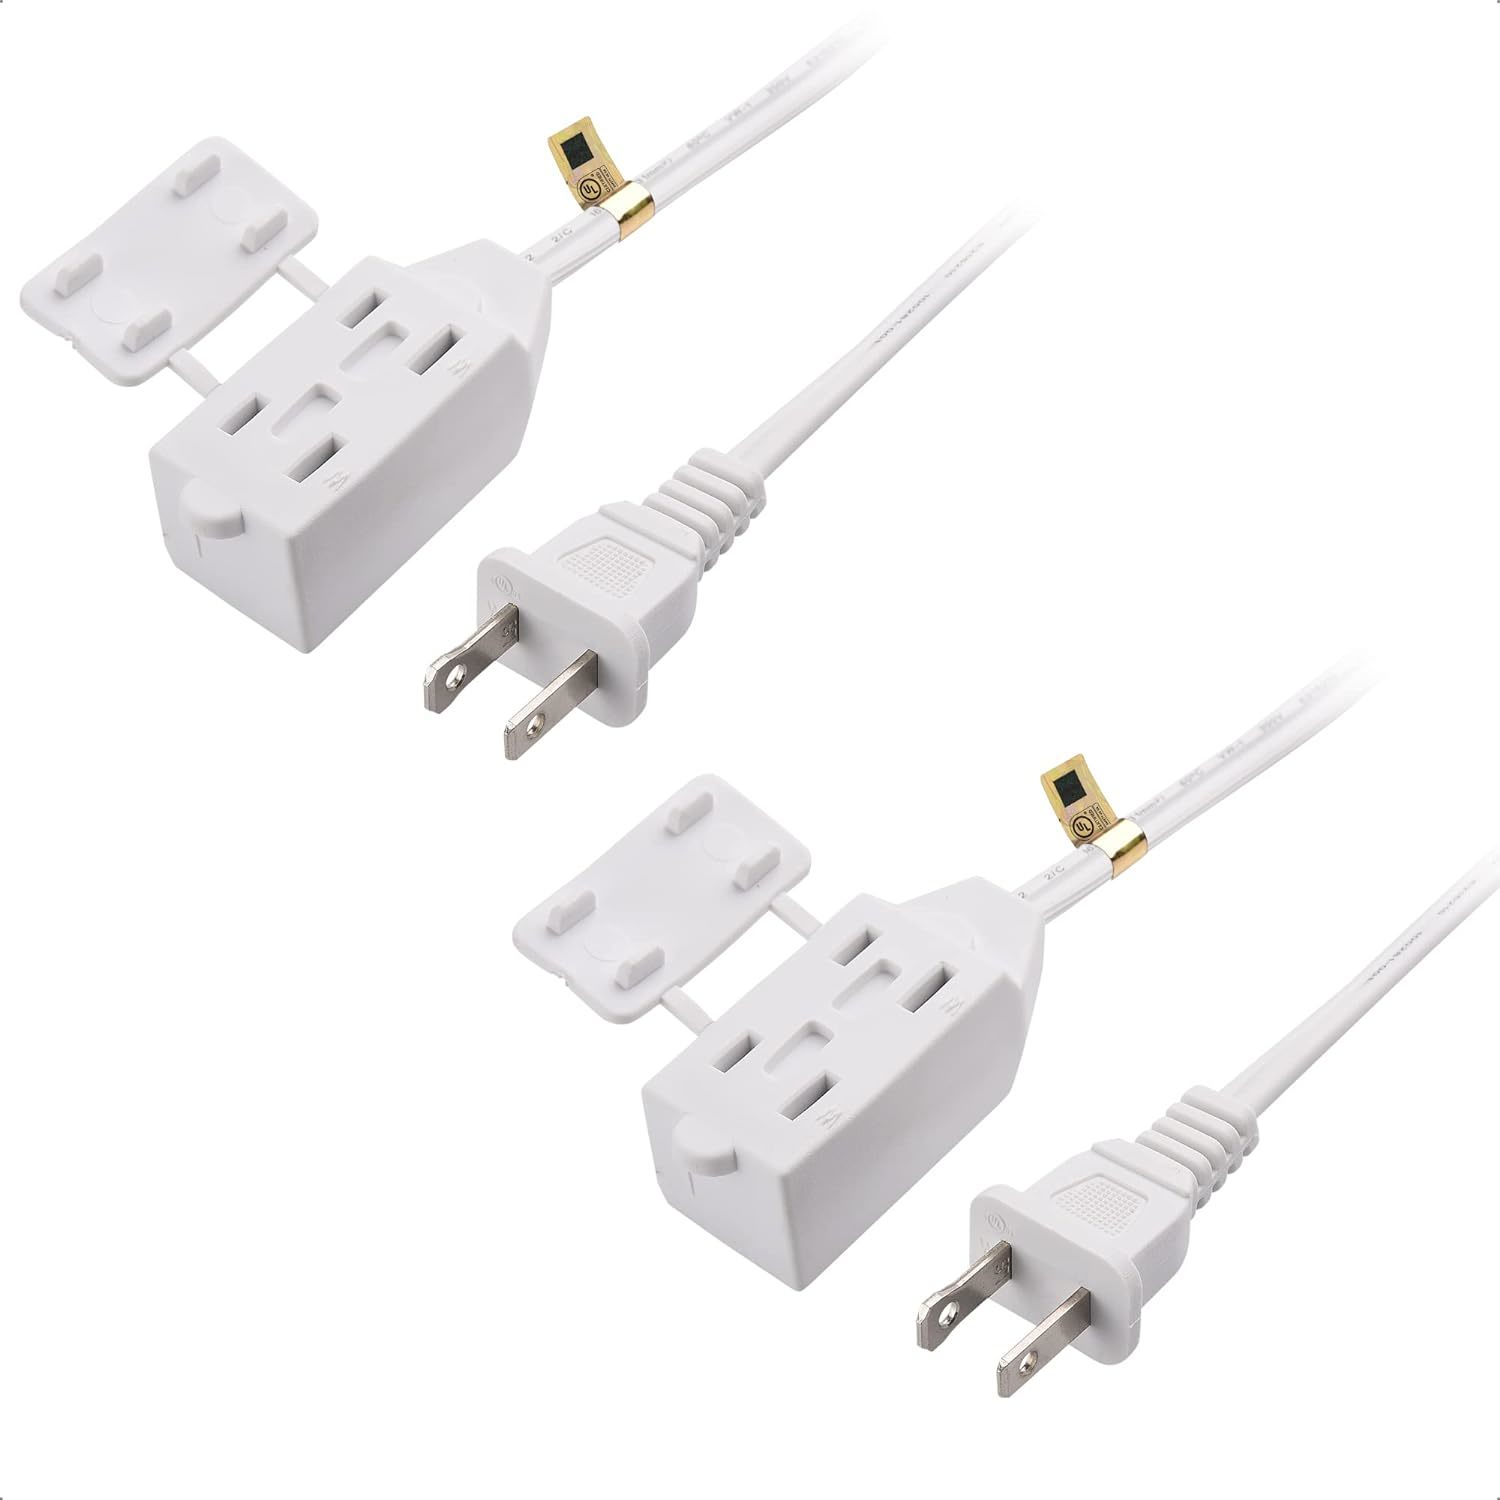 Primary image for Cable Matters 2-Pack 16 AWG 2 Prong Extension Cord 6 ft, UL Listed (3 Outlet Ext